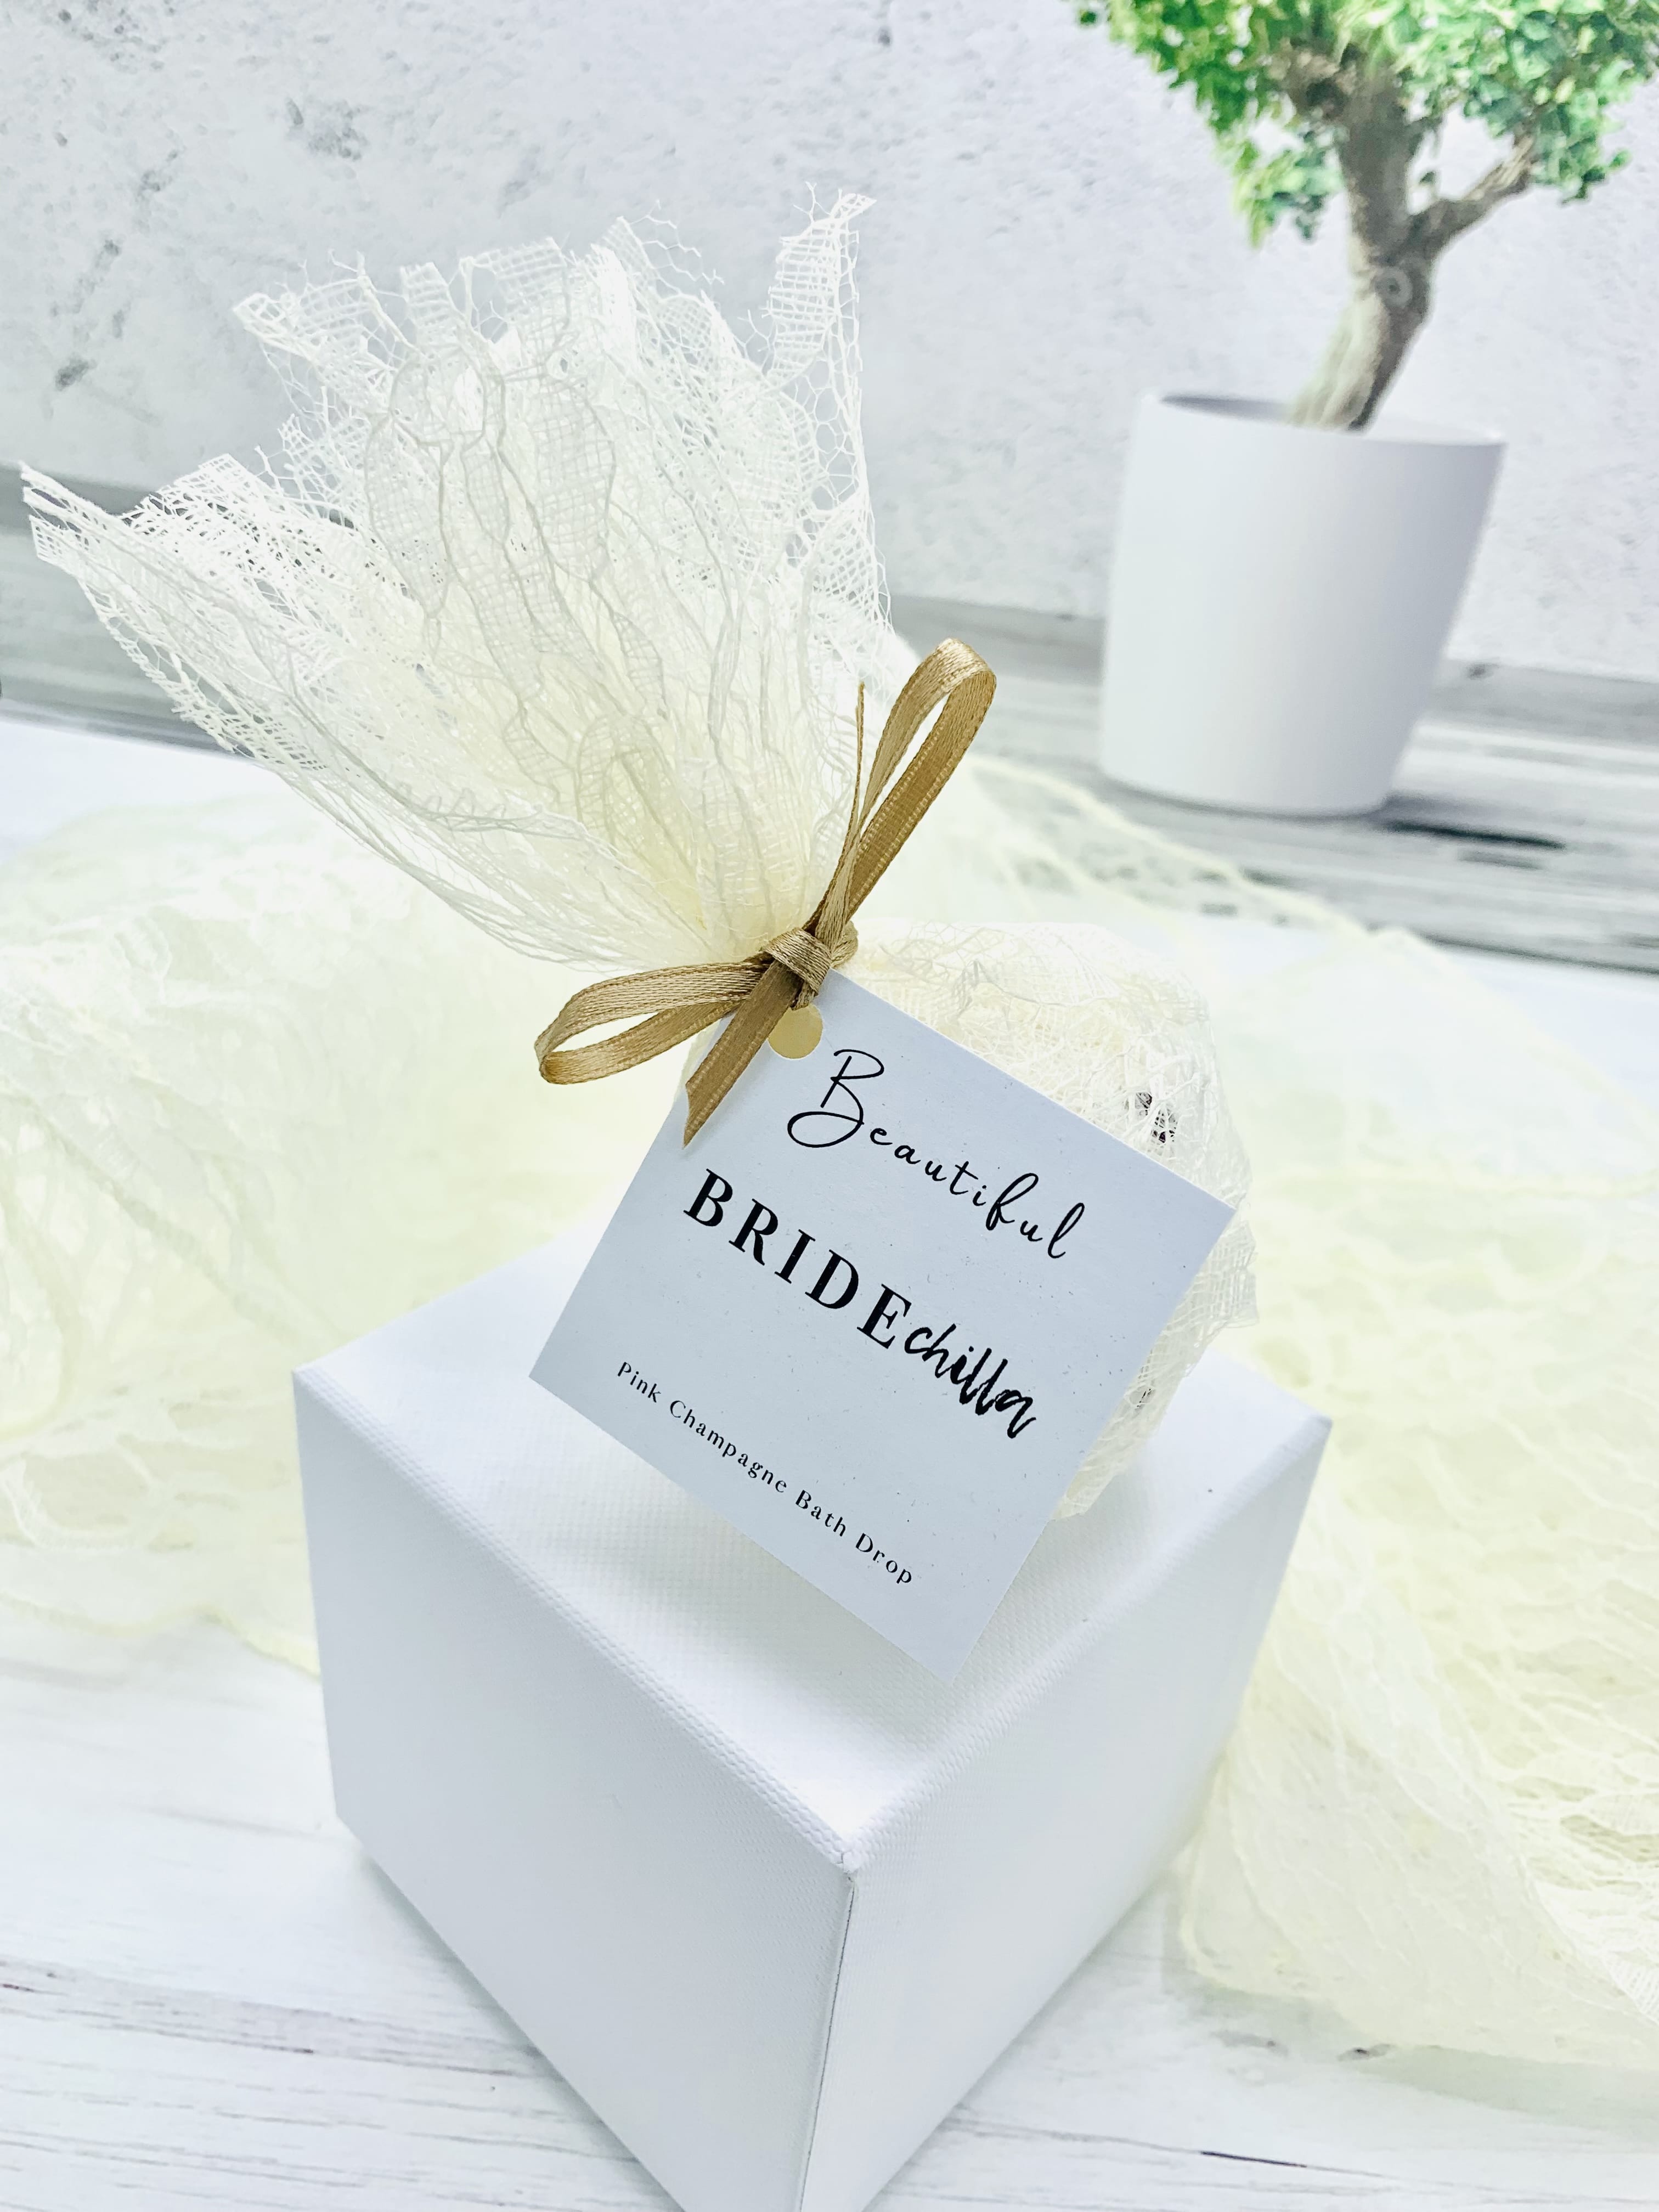 Indulge in a luxurious bath with the Bridechilla Bath Bomb. Made specifically for brides, this bath bomb will help you relax and unwind before the big day. With its unique blend of essential oils and soothing ingredients, it will leave your skin feeling soft and rejuvenated. Say goodbye to pre-wedding jitters and hello to pampered bliss.